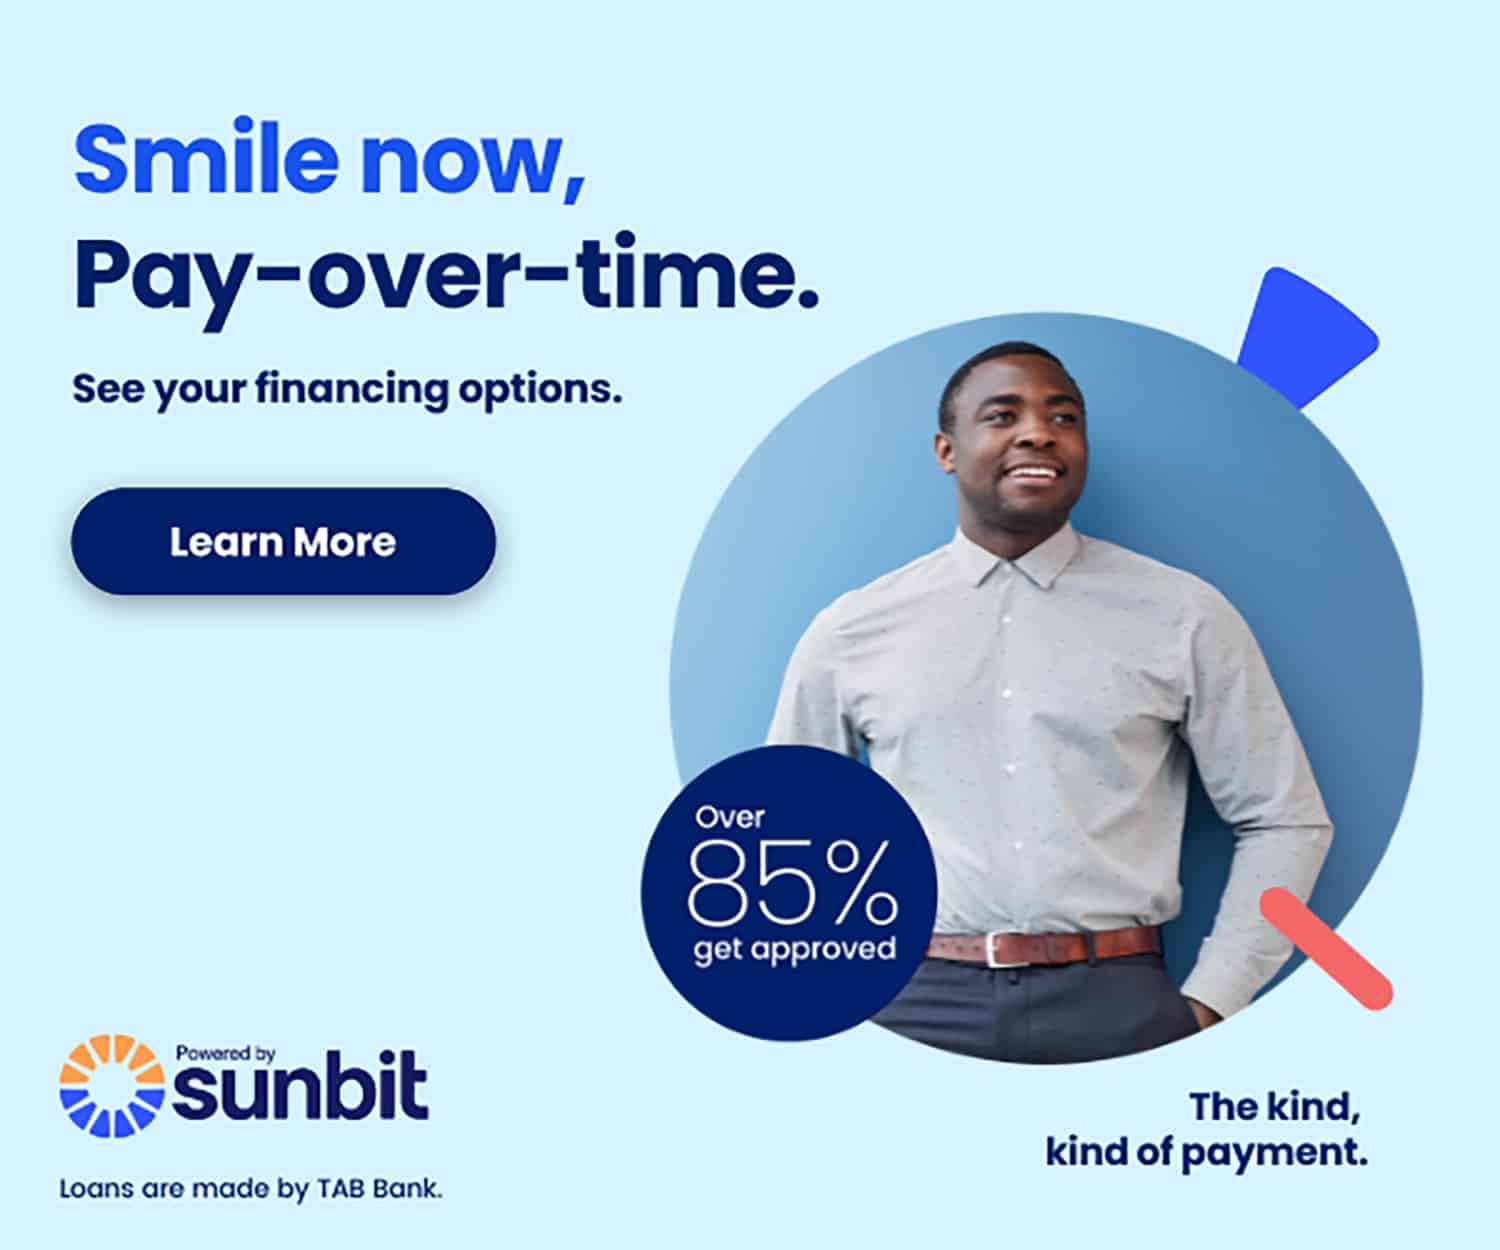 Sunbit pay-over-time financing options available for dental care in Brentwood, TN